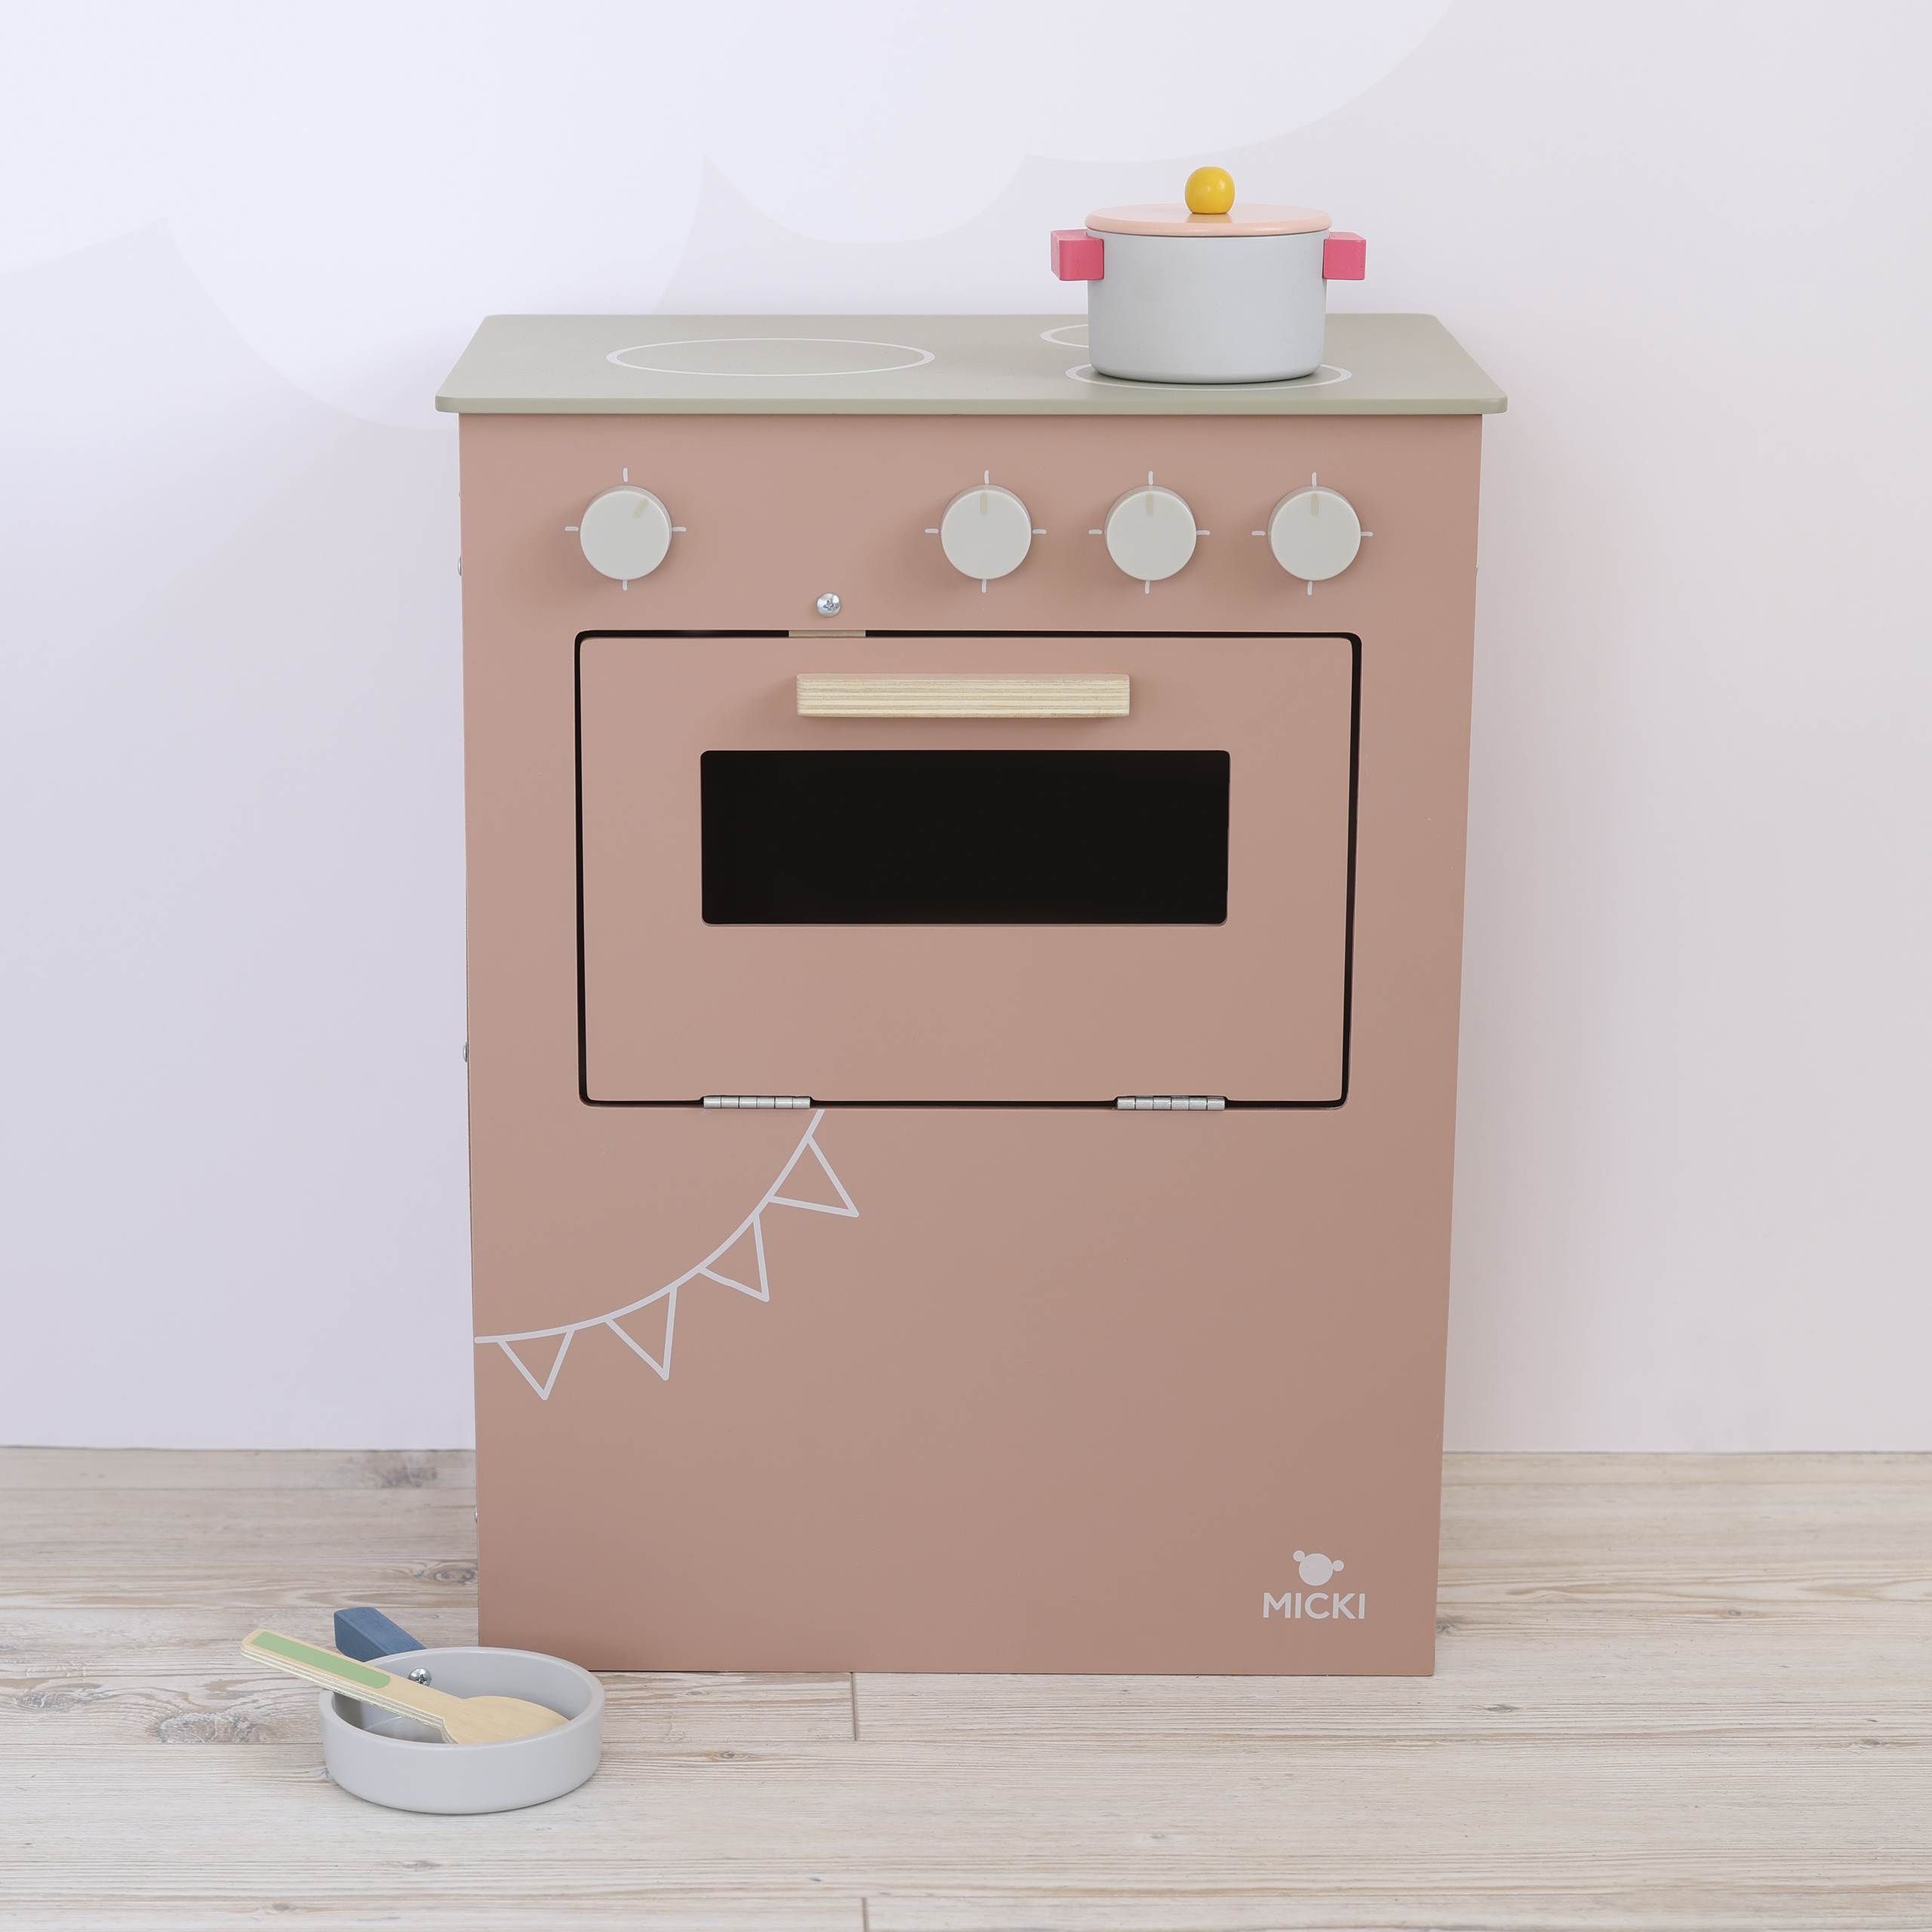 Wooden toys micki toy stove pink